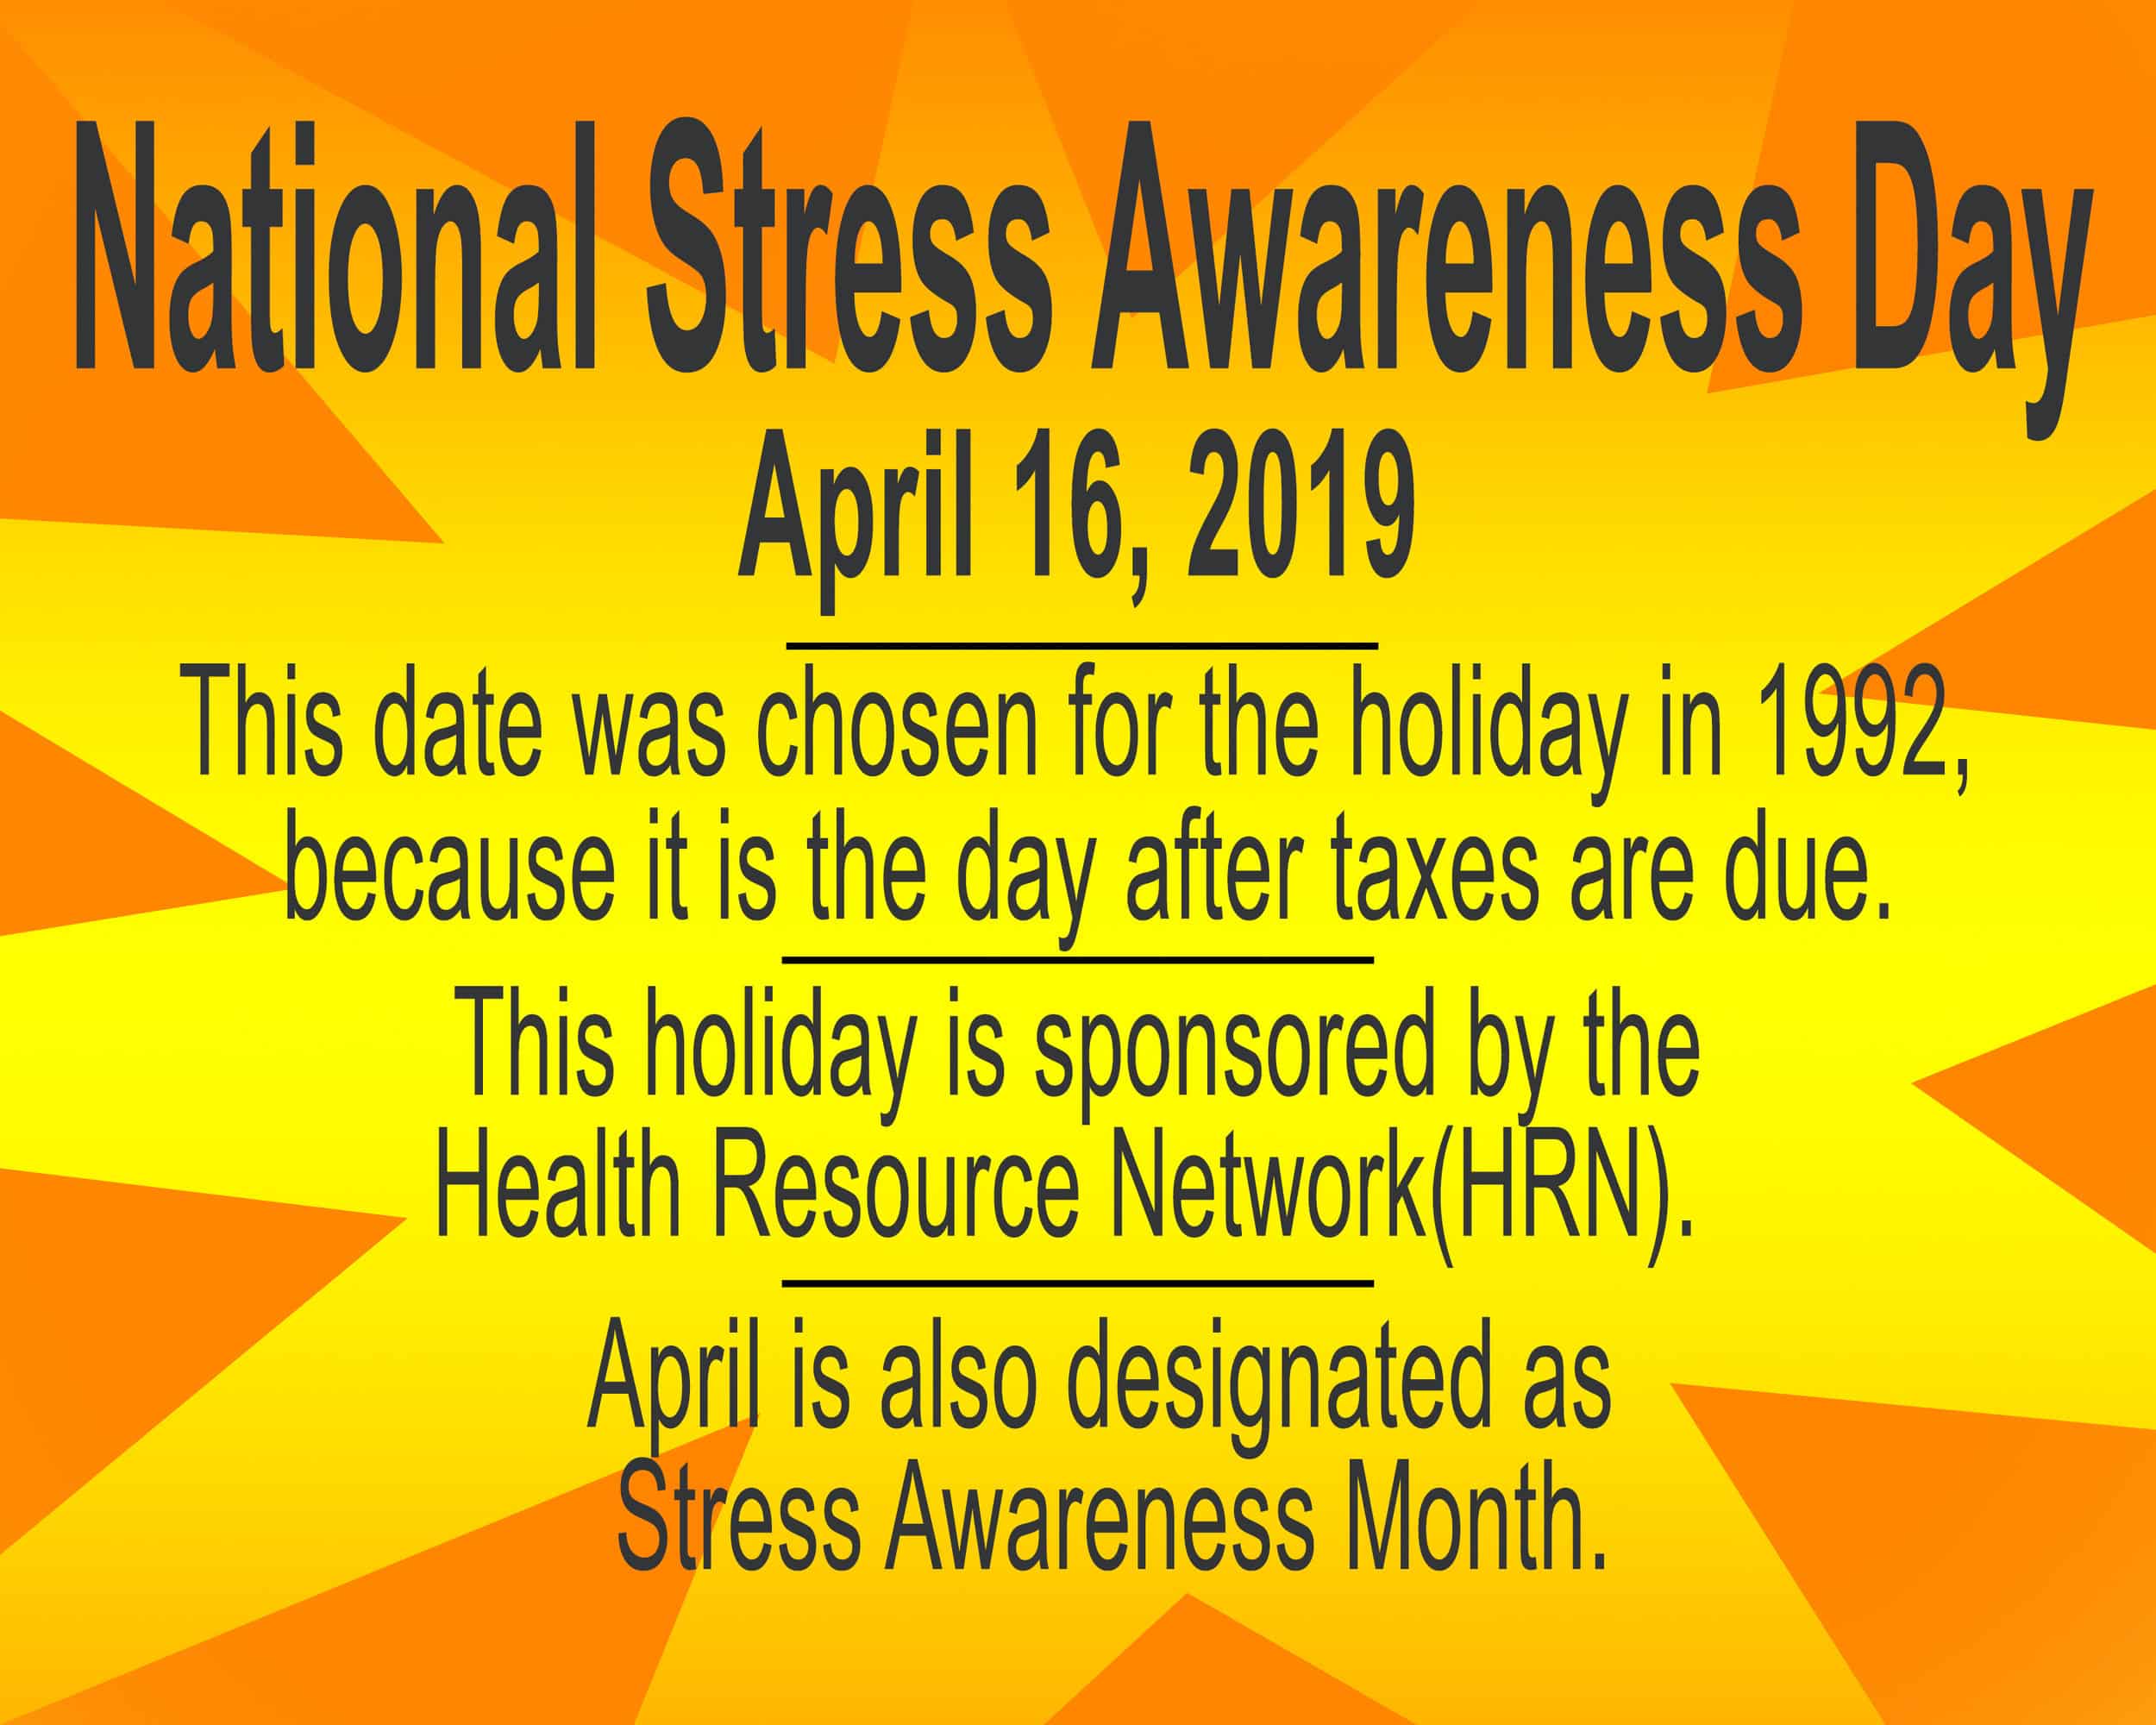 National stress awareness day on April 16, 2019 is a time to reflect on the stress in your life and a day to do something about that stress. http://www.holidayinsights.com/other/stressawareness.htm